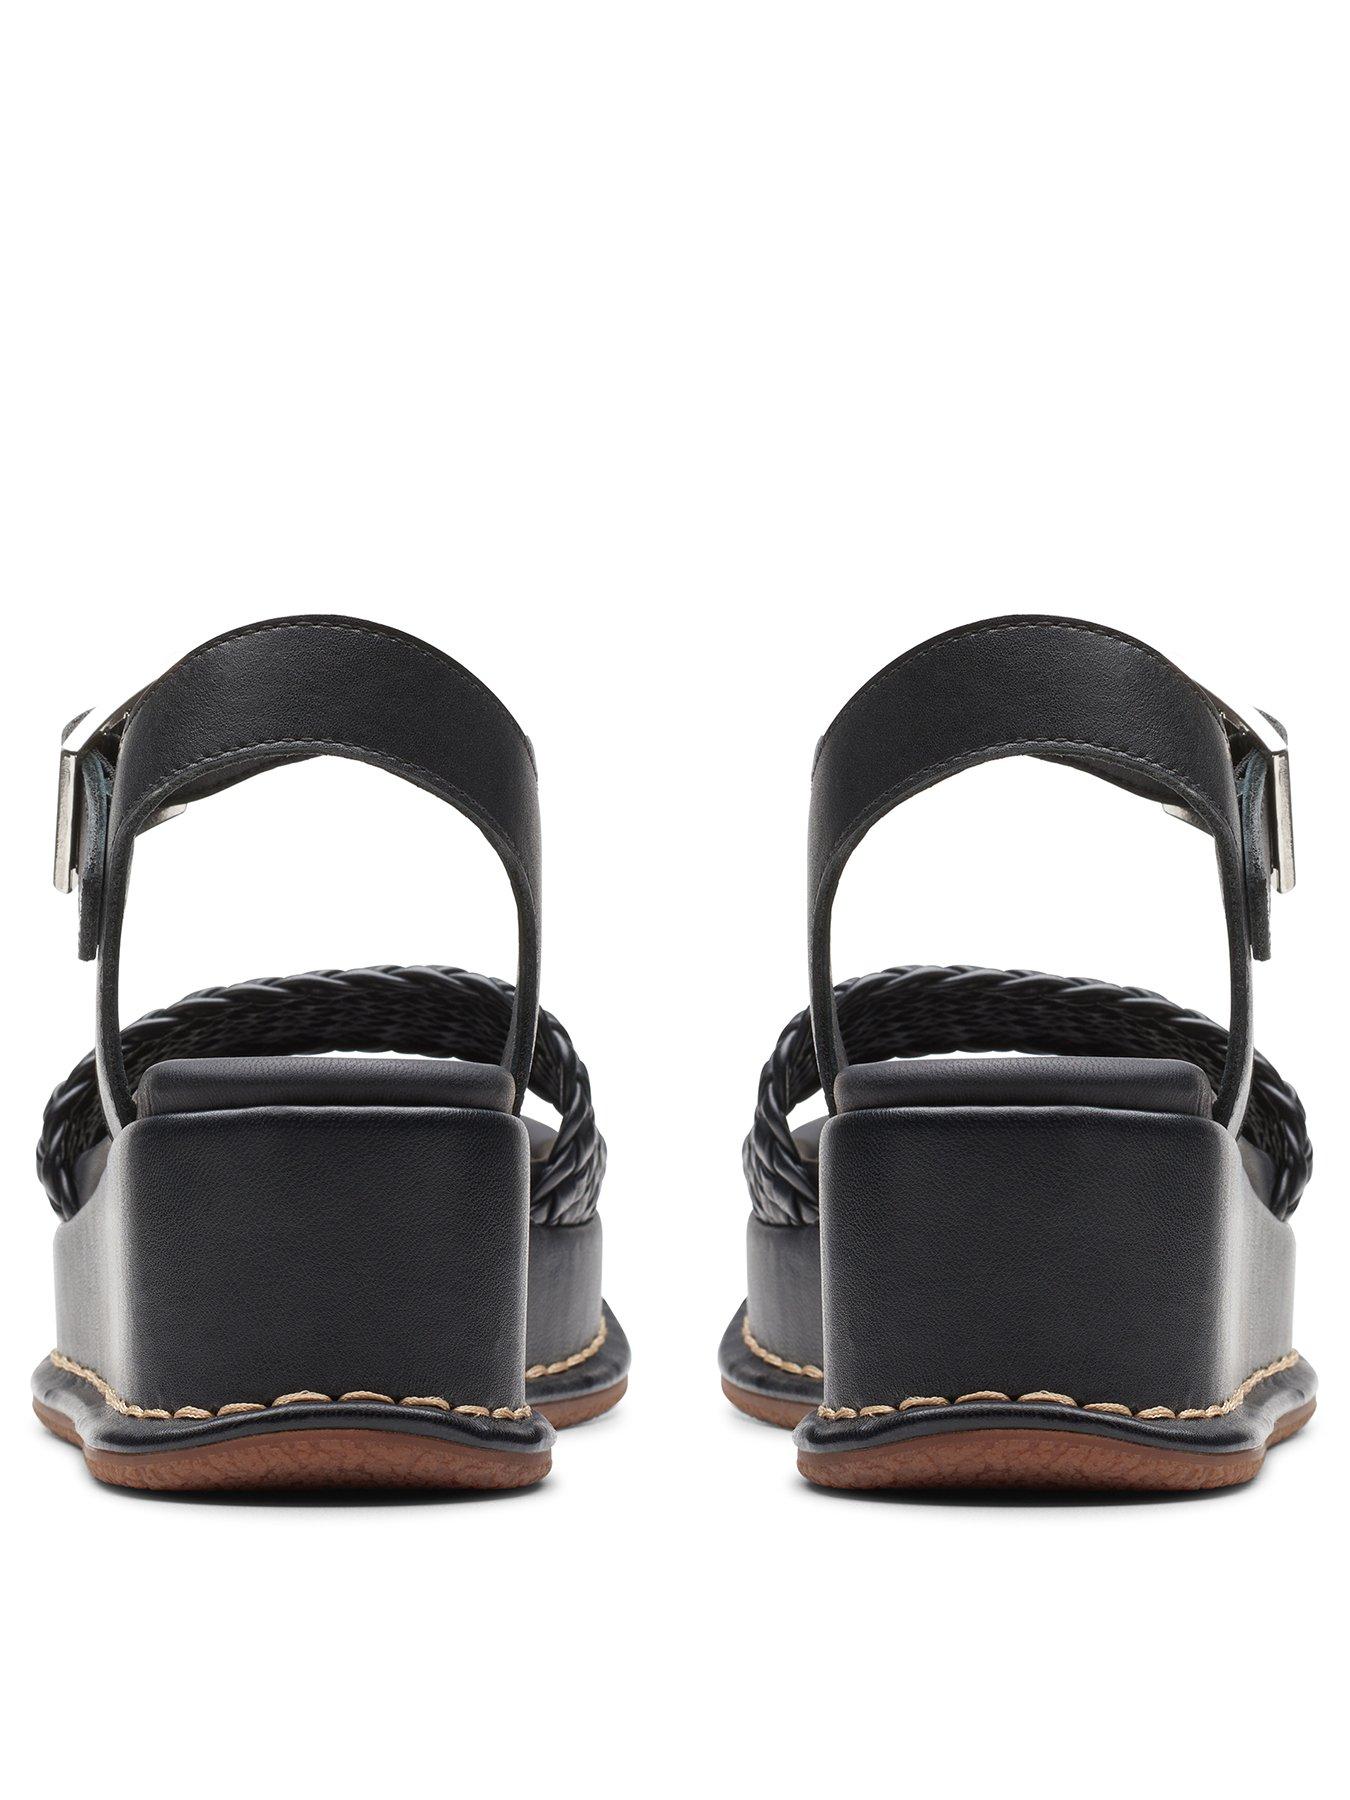 Clarks Kimmei Bay Wedge Buckle Strap Sandals - Black | Very.co.uk